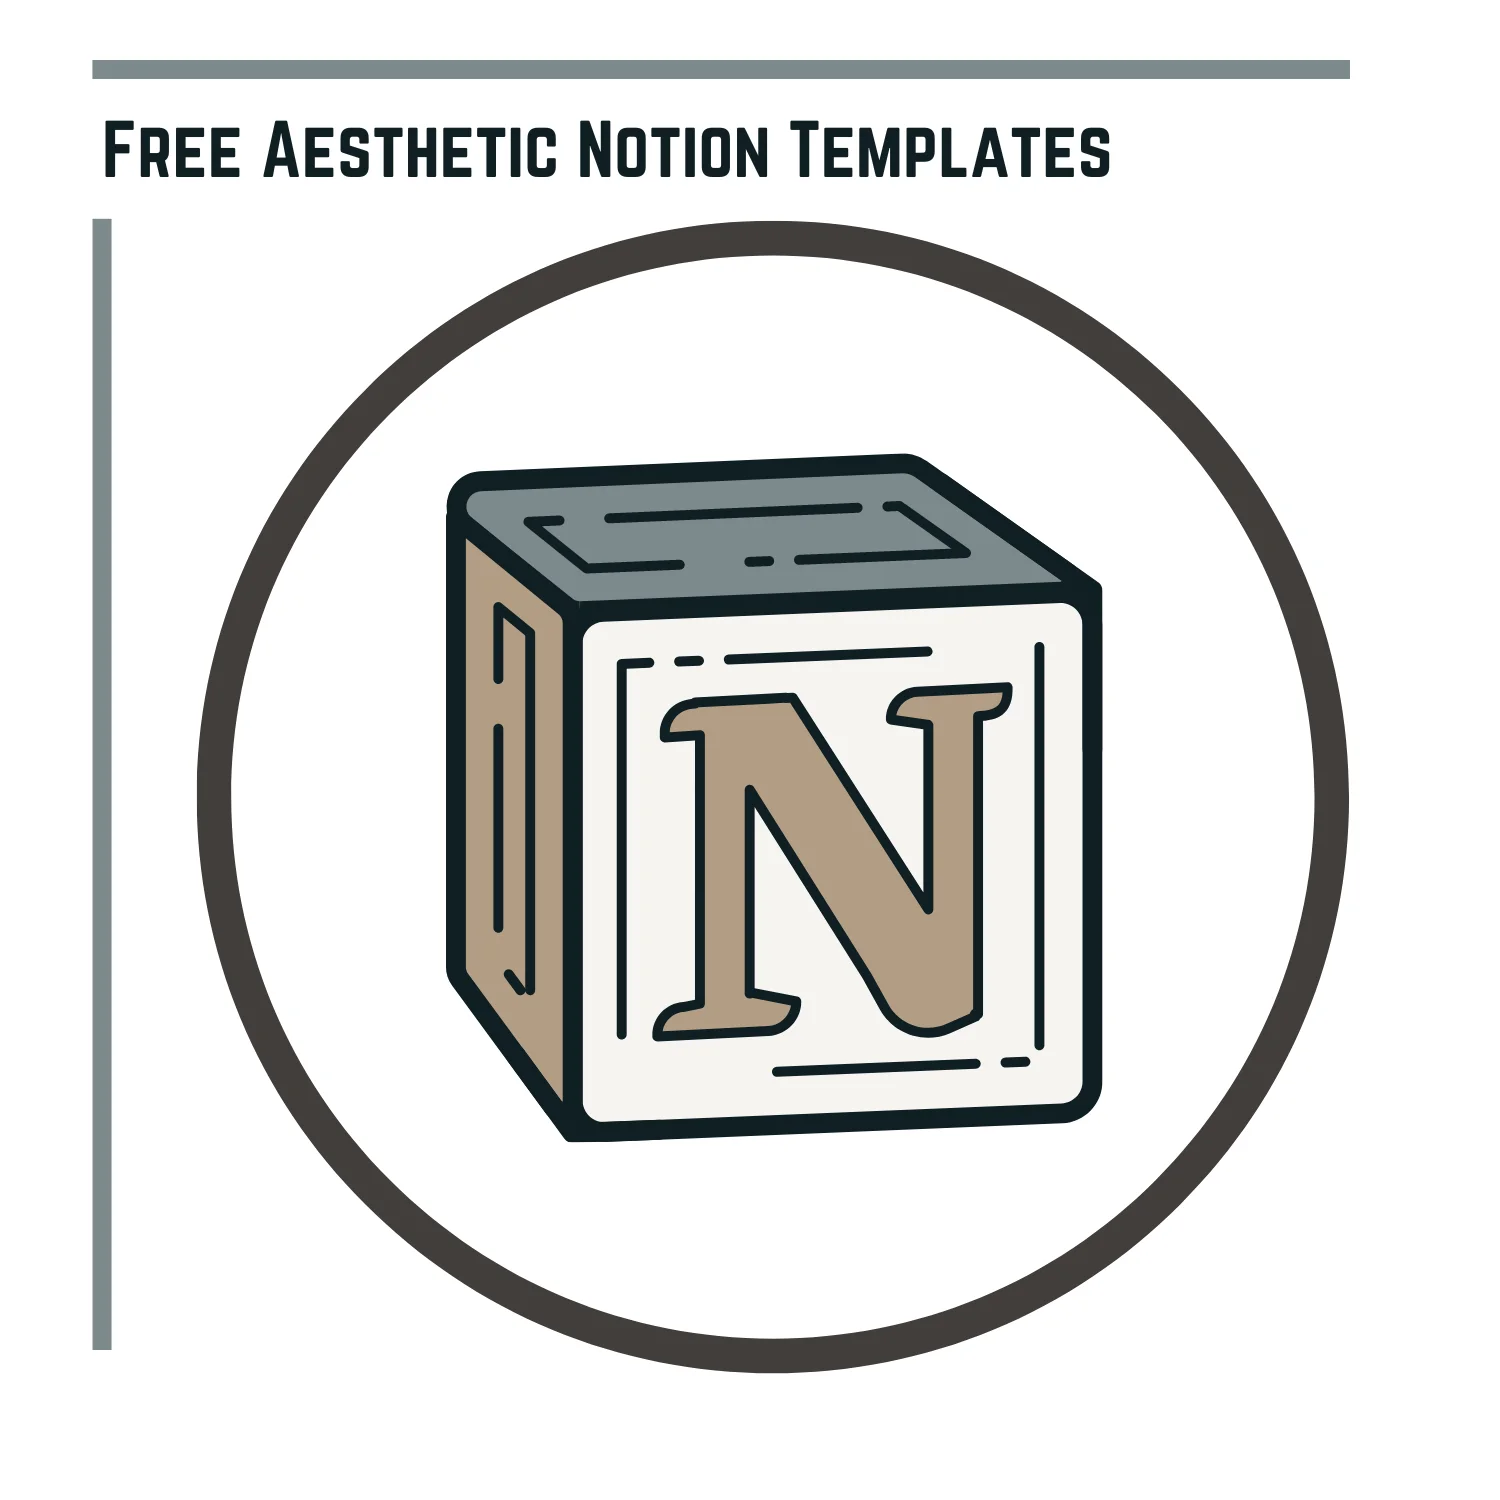 17 Best and Free Aesthetic Notion Templates